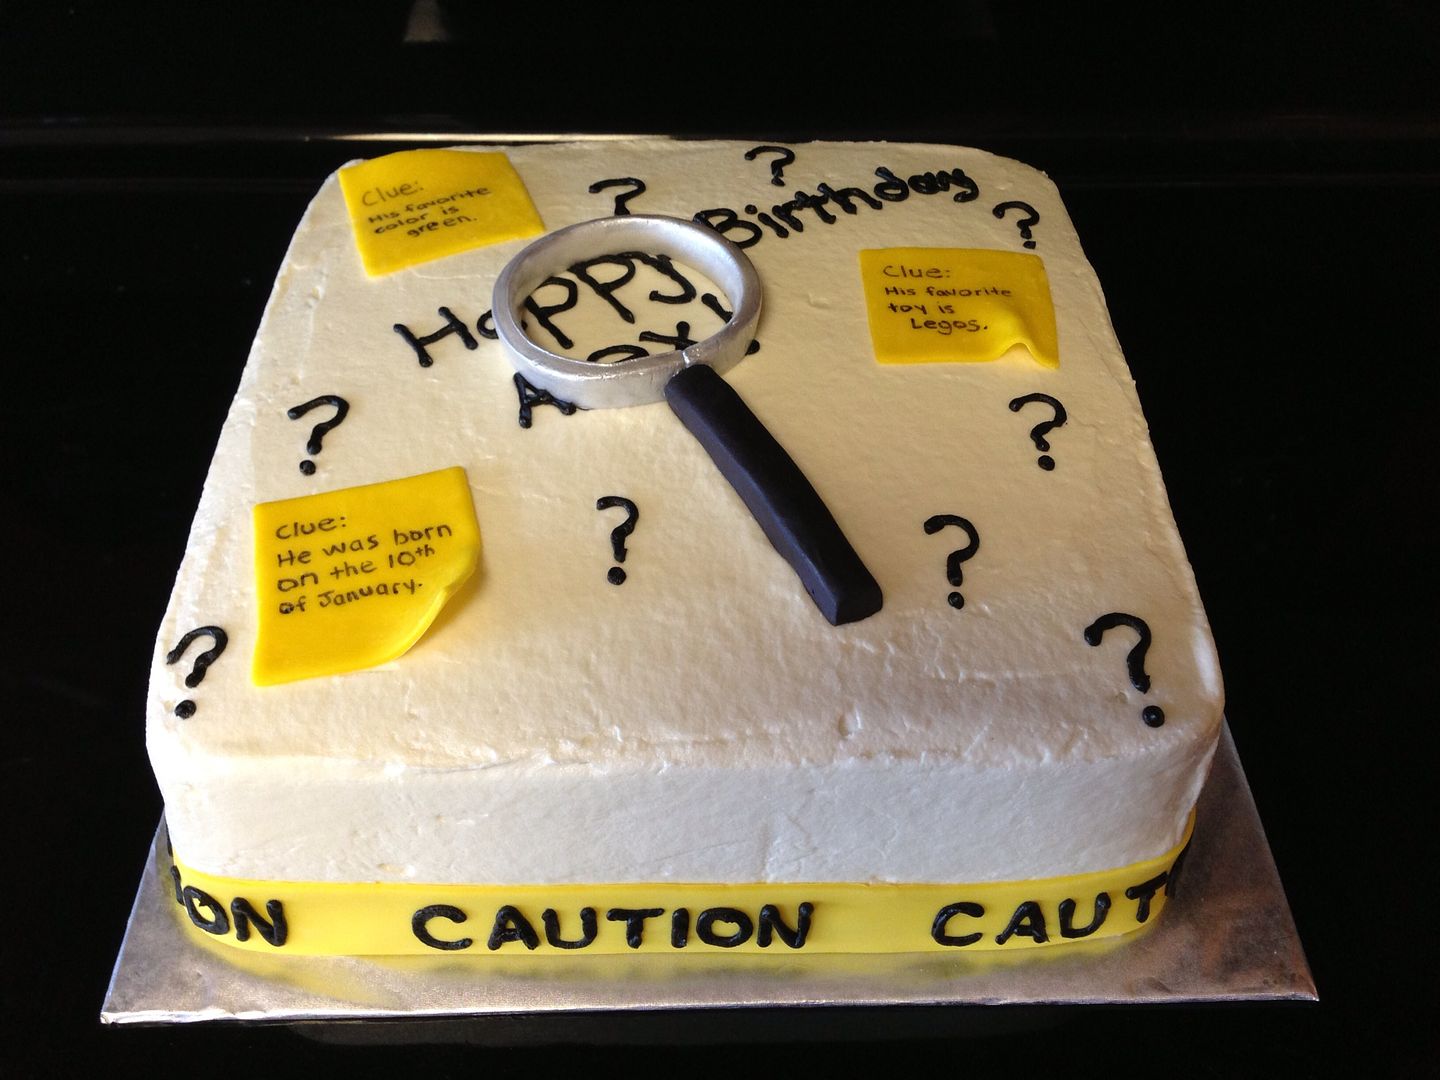 Escape Room Party: Mystery Cake via @CandiDavidson on Pinterest